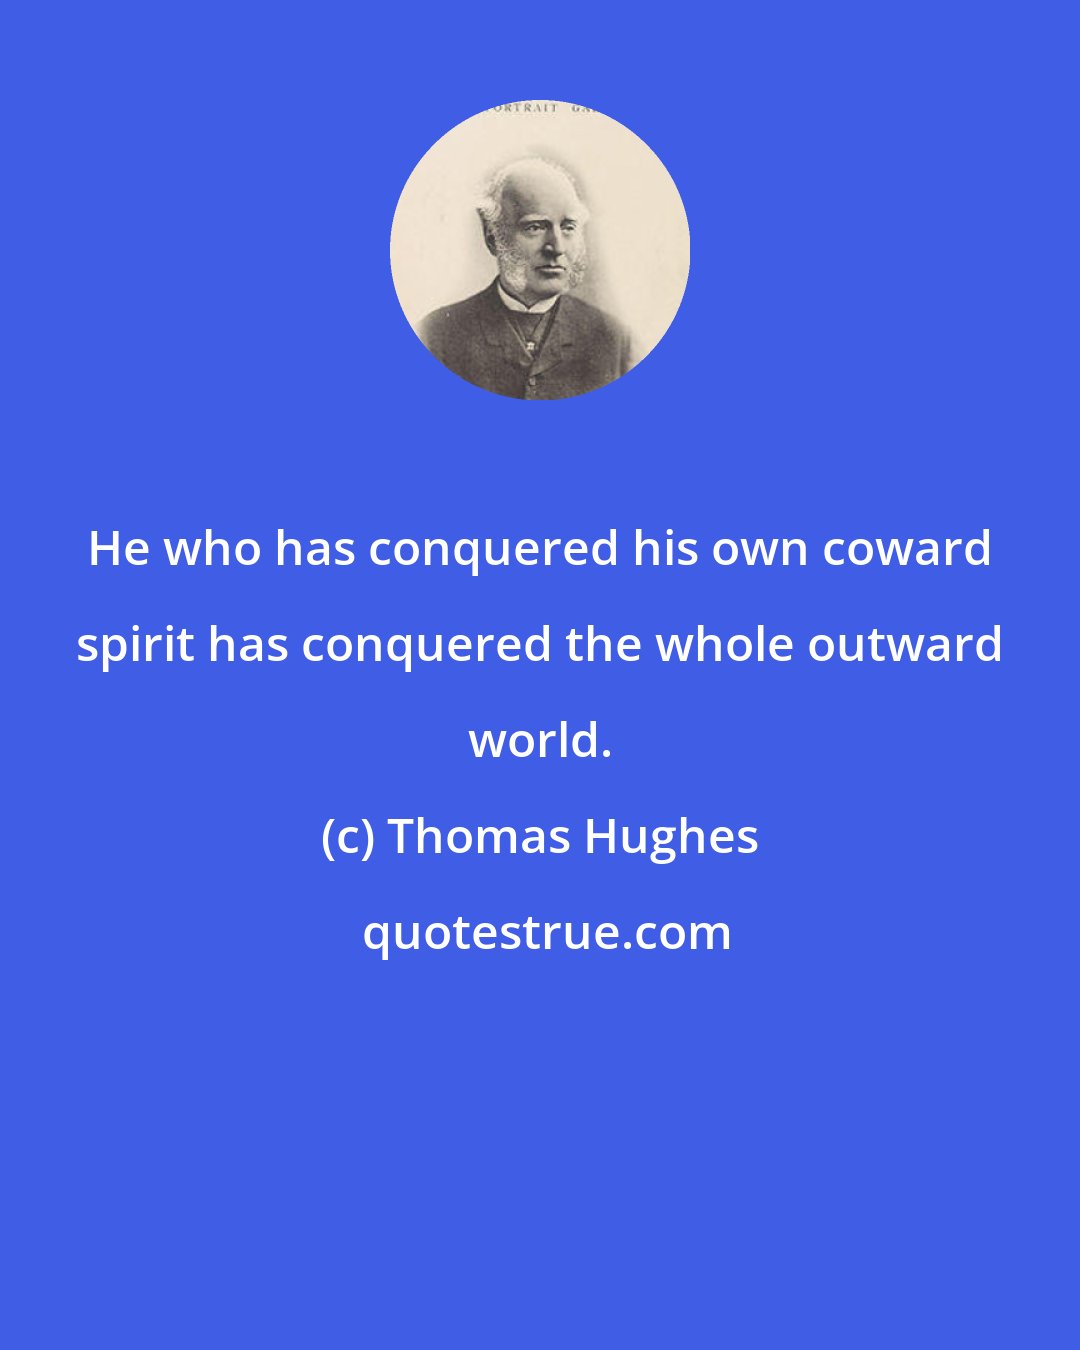 Thomas Hughes: He who has conquered his own coward spirit has conquered the whole outward world.